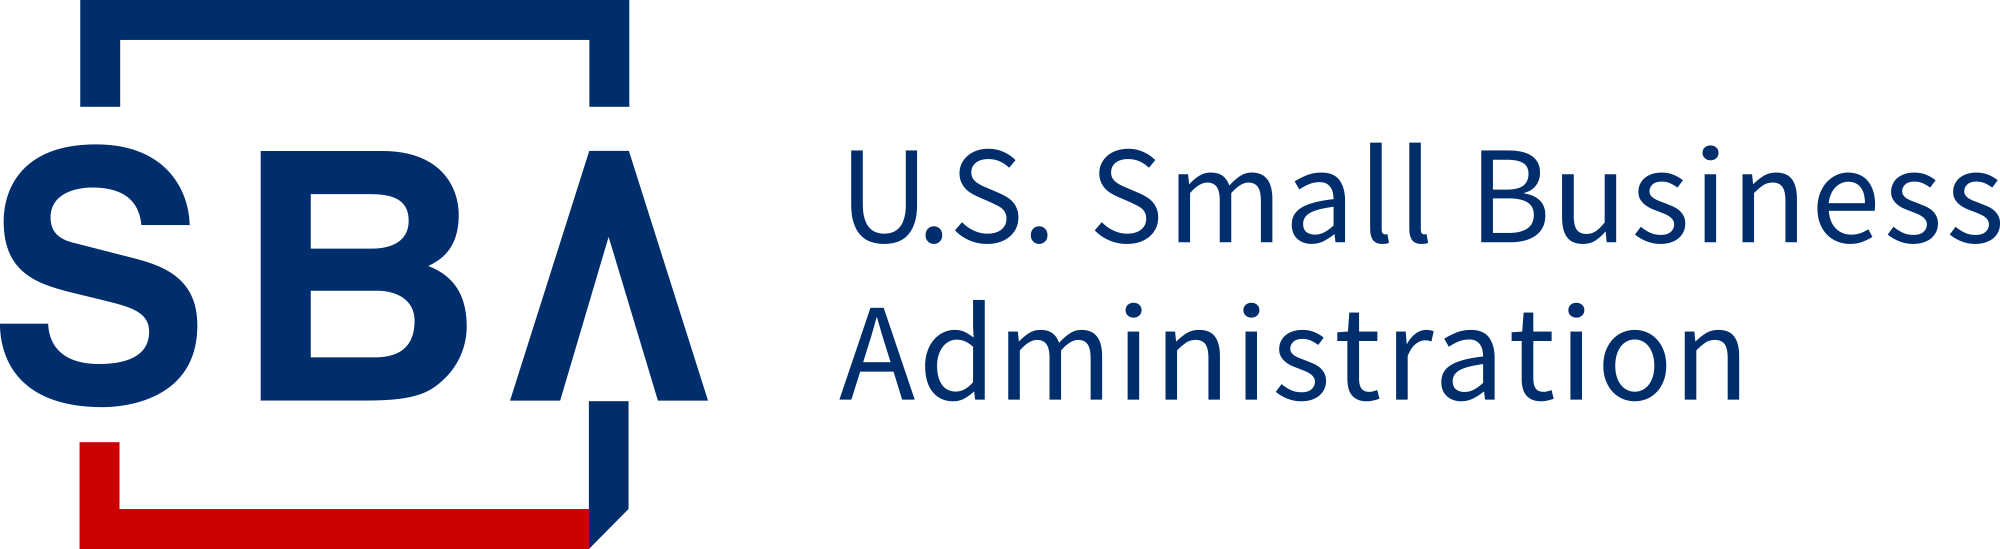 U.S. Small Business Administration 8a Certified